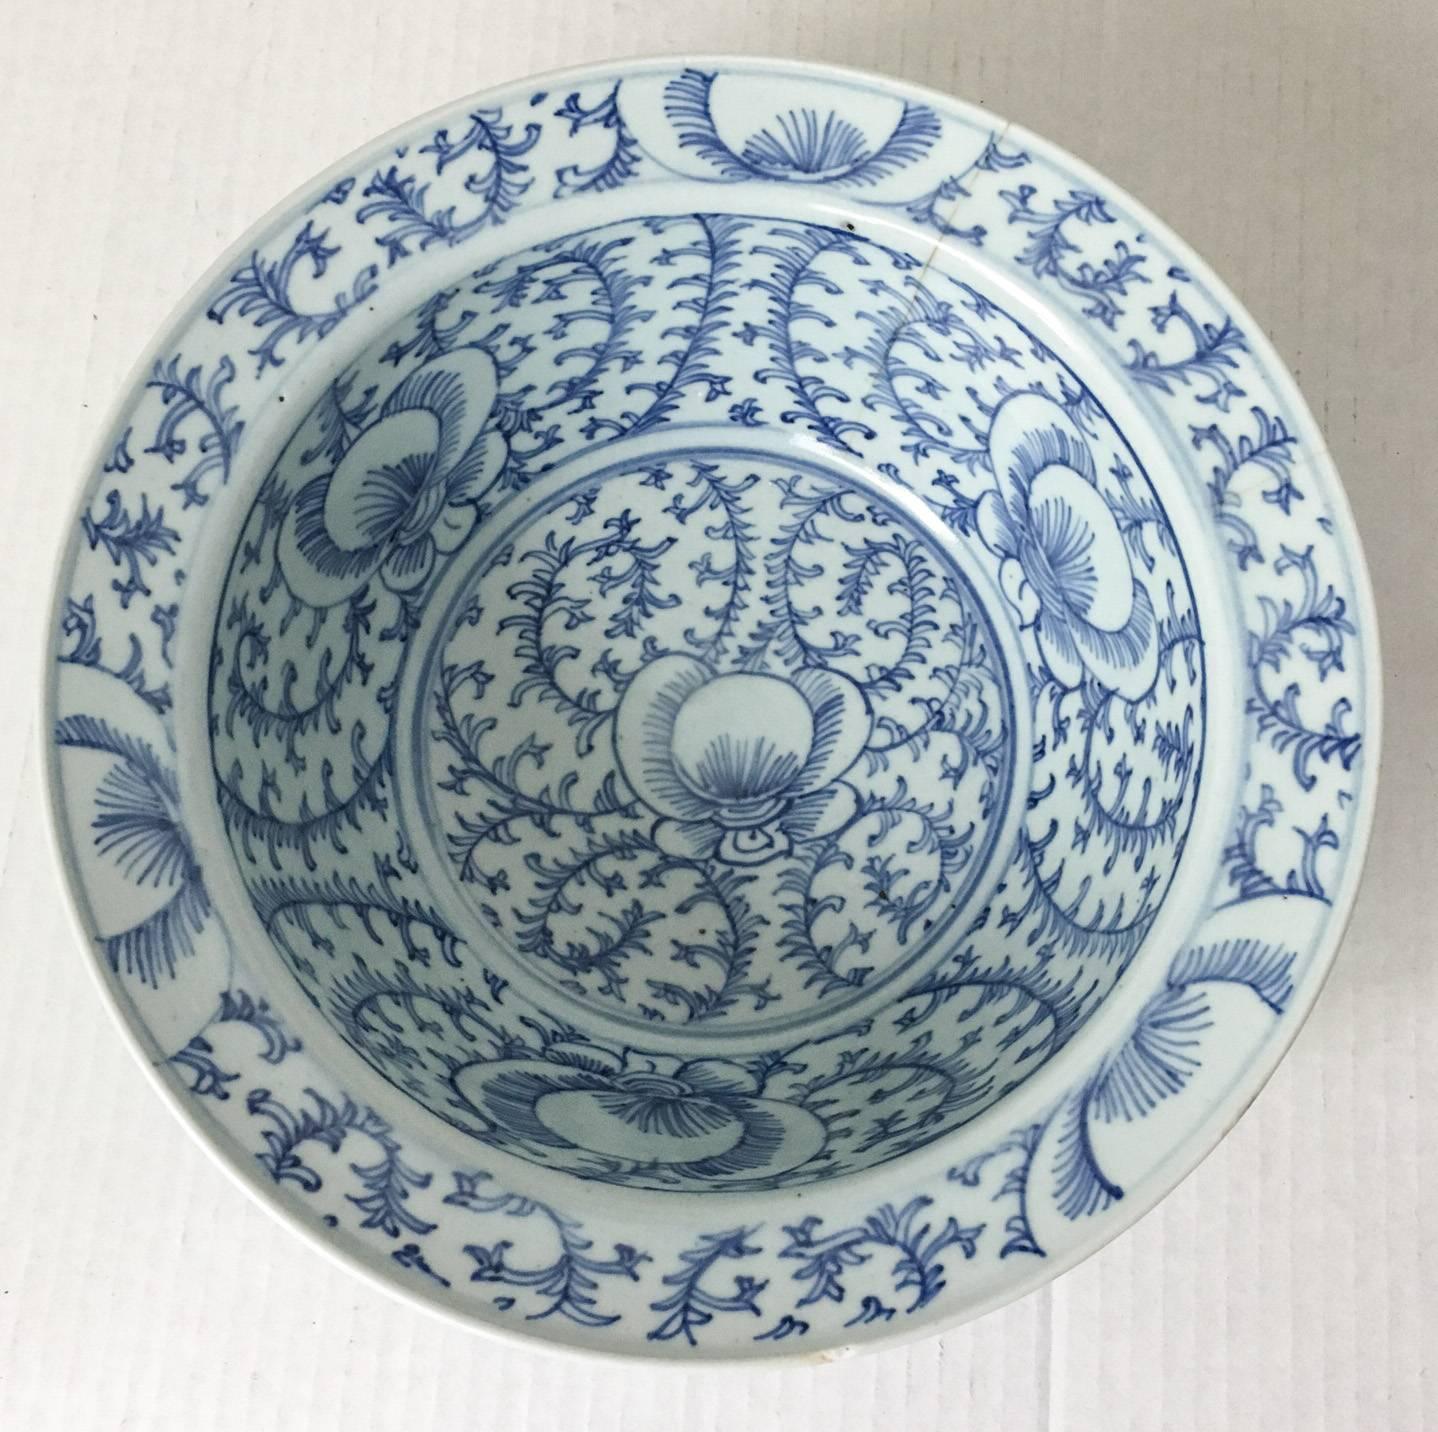 Offered is a beautiful example of traditional salt glazed blue-and-white porcelain, this exquisitely decorated bowl begs close inspection to appreciate its intricate vine detail. Accented with large violet-like blooms, the decoration possesses a